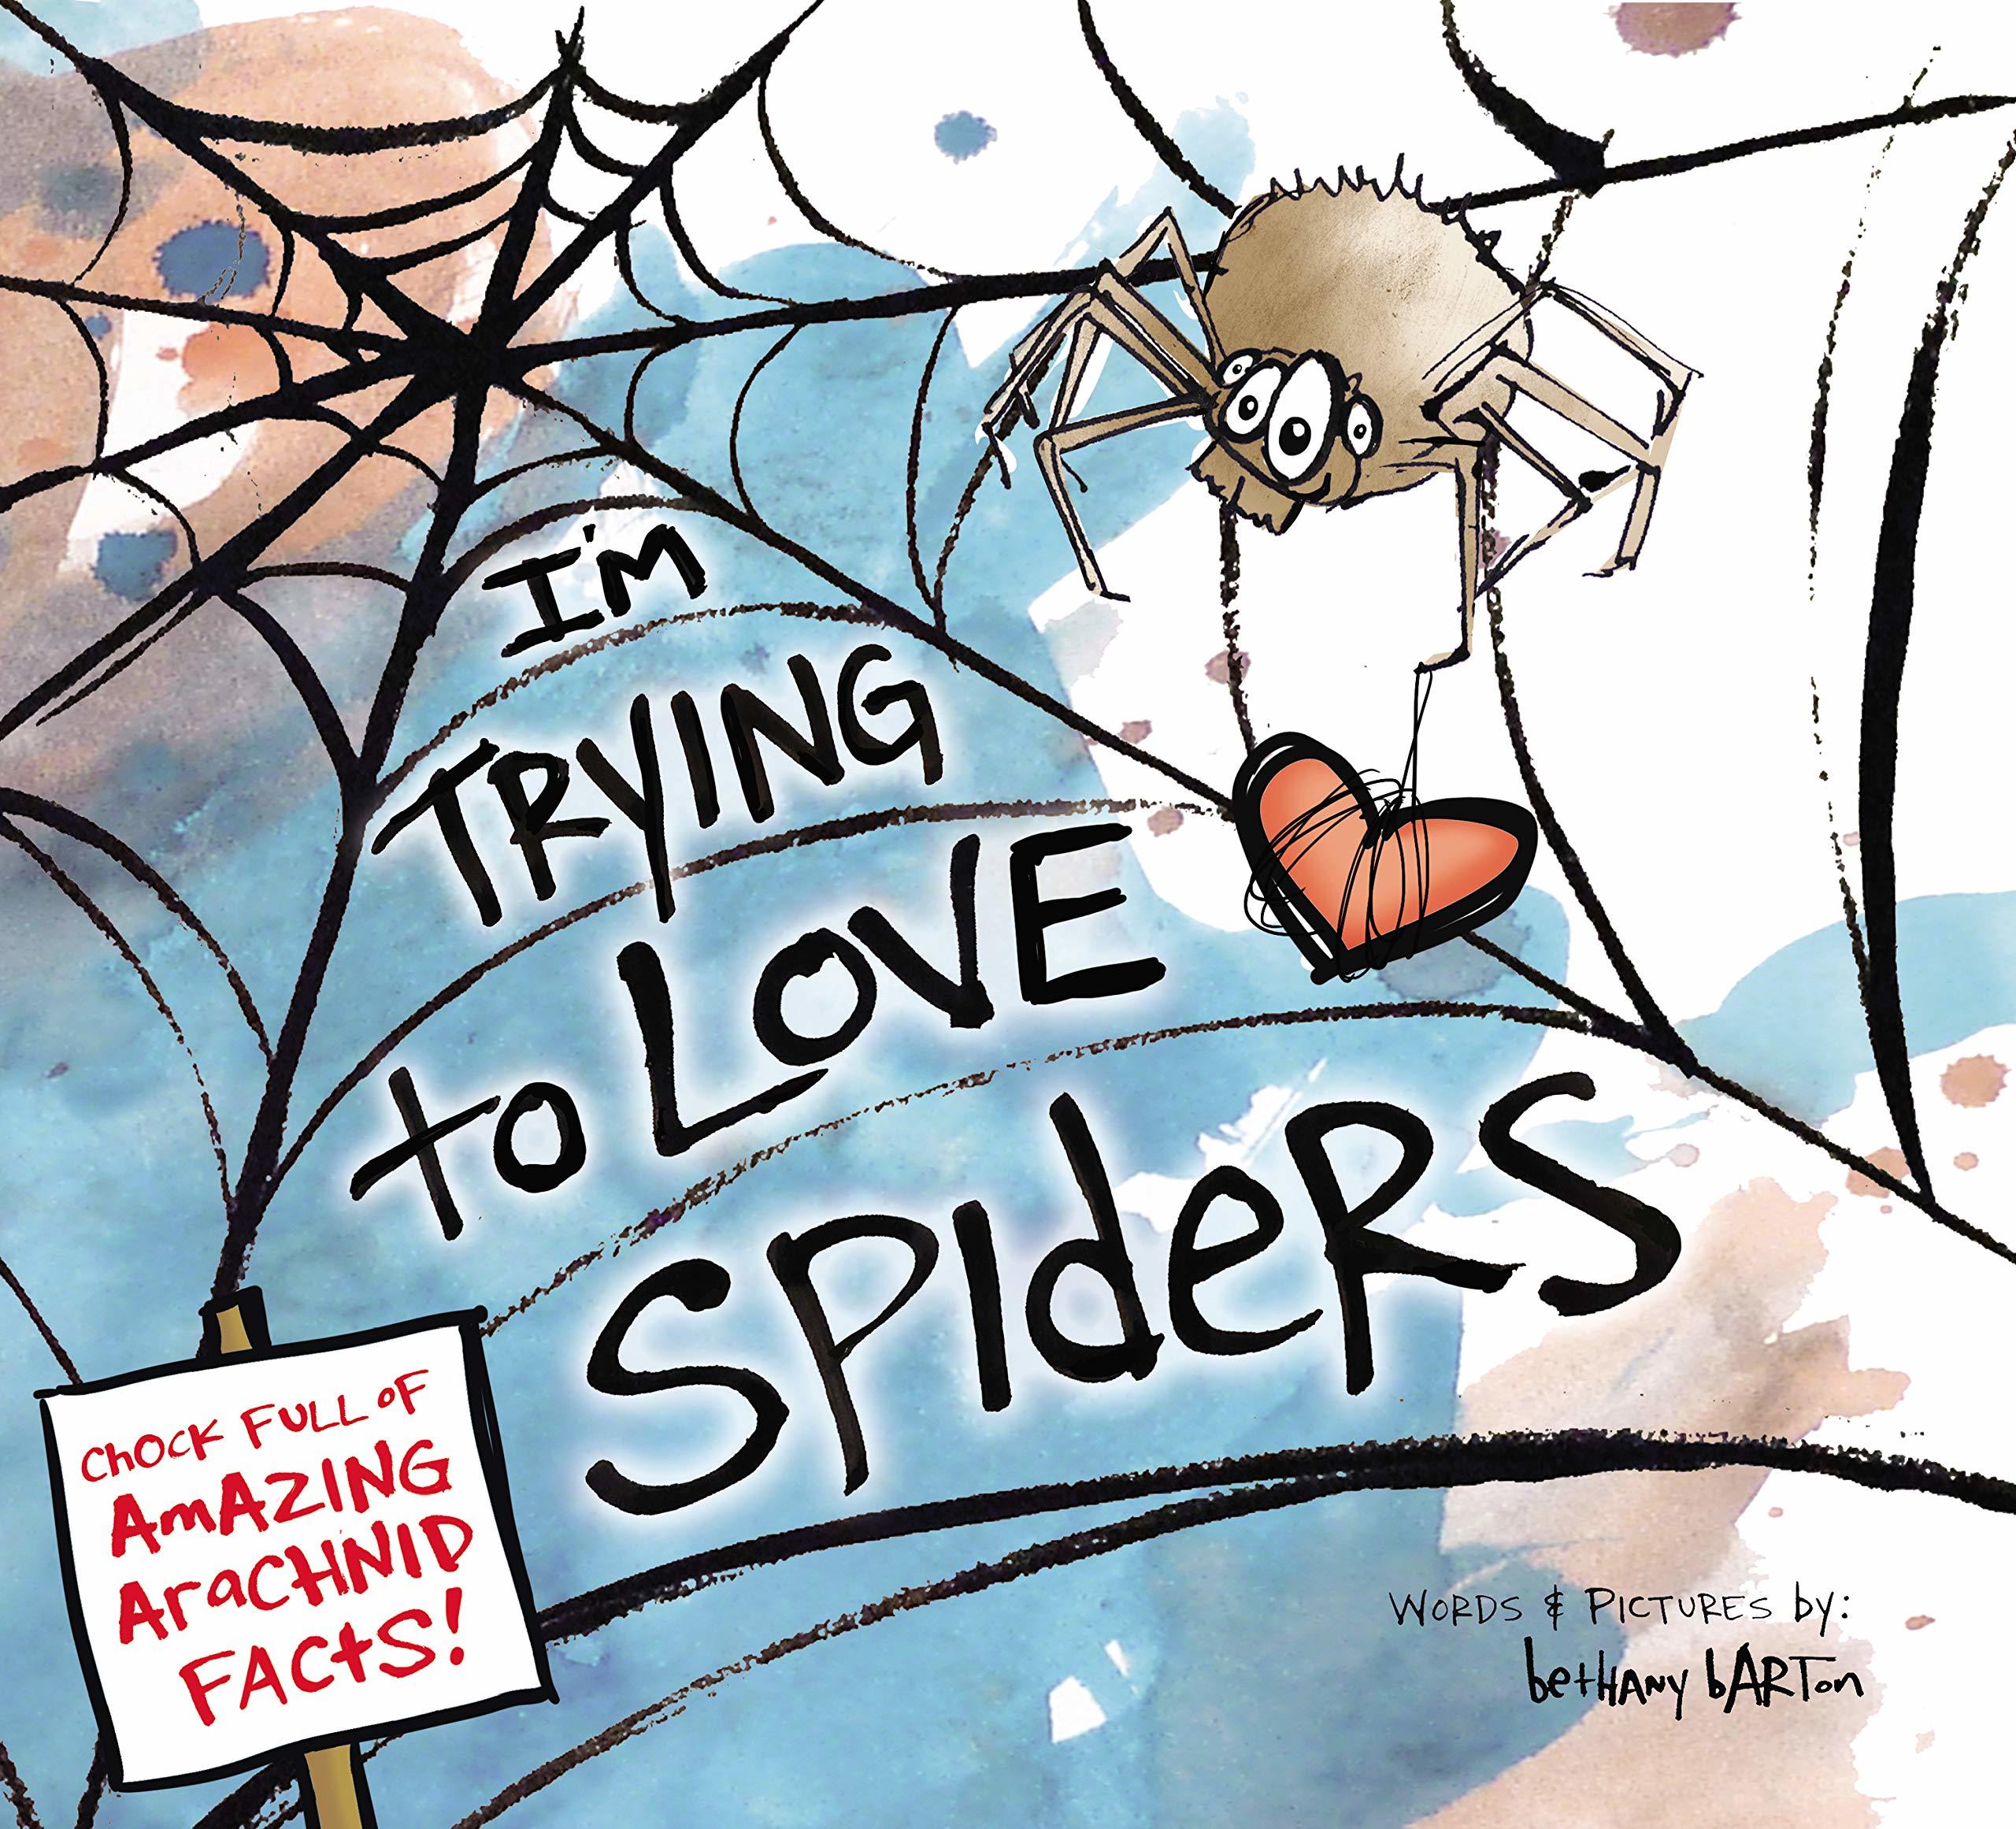 I'm trying to Love Spiders book